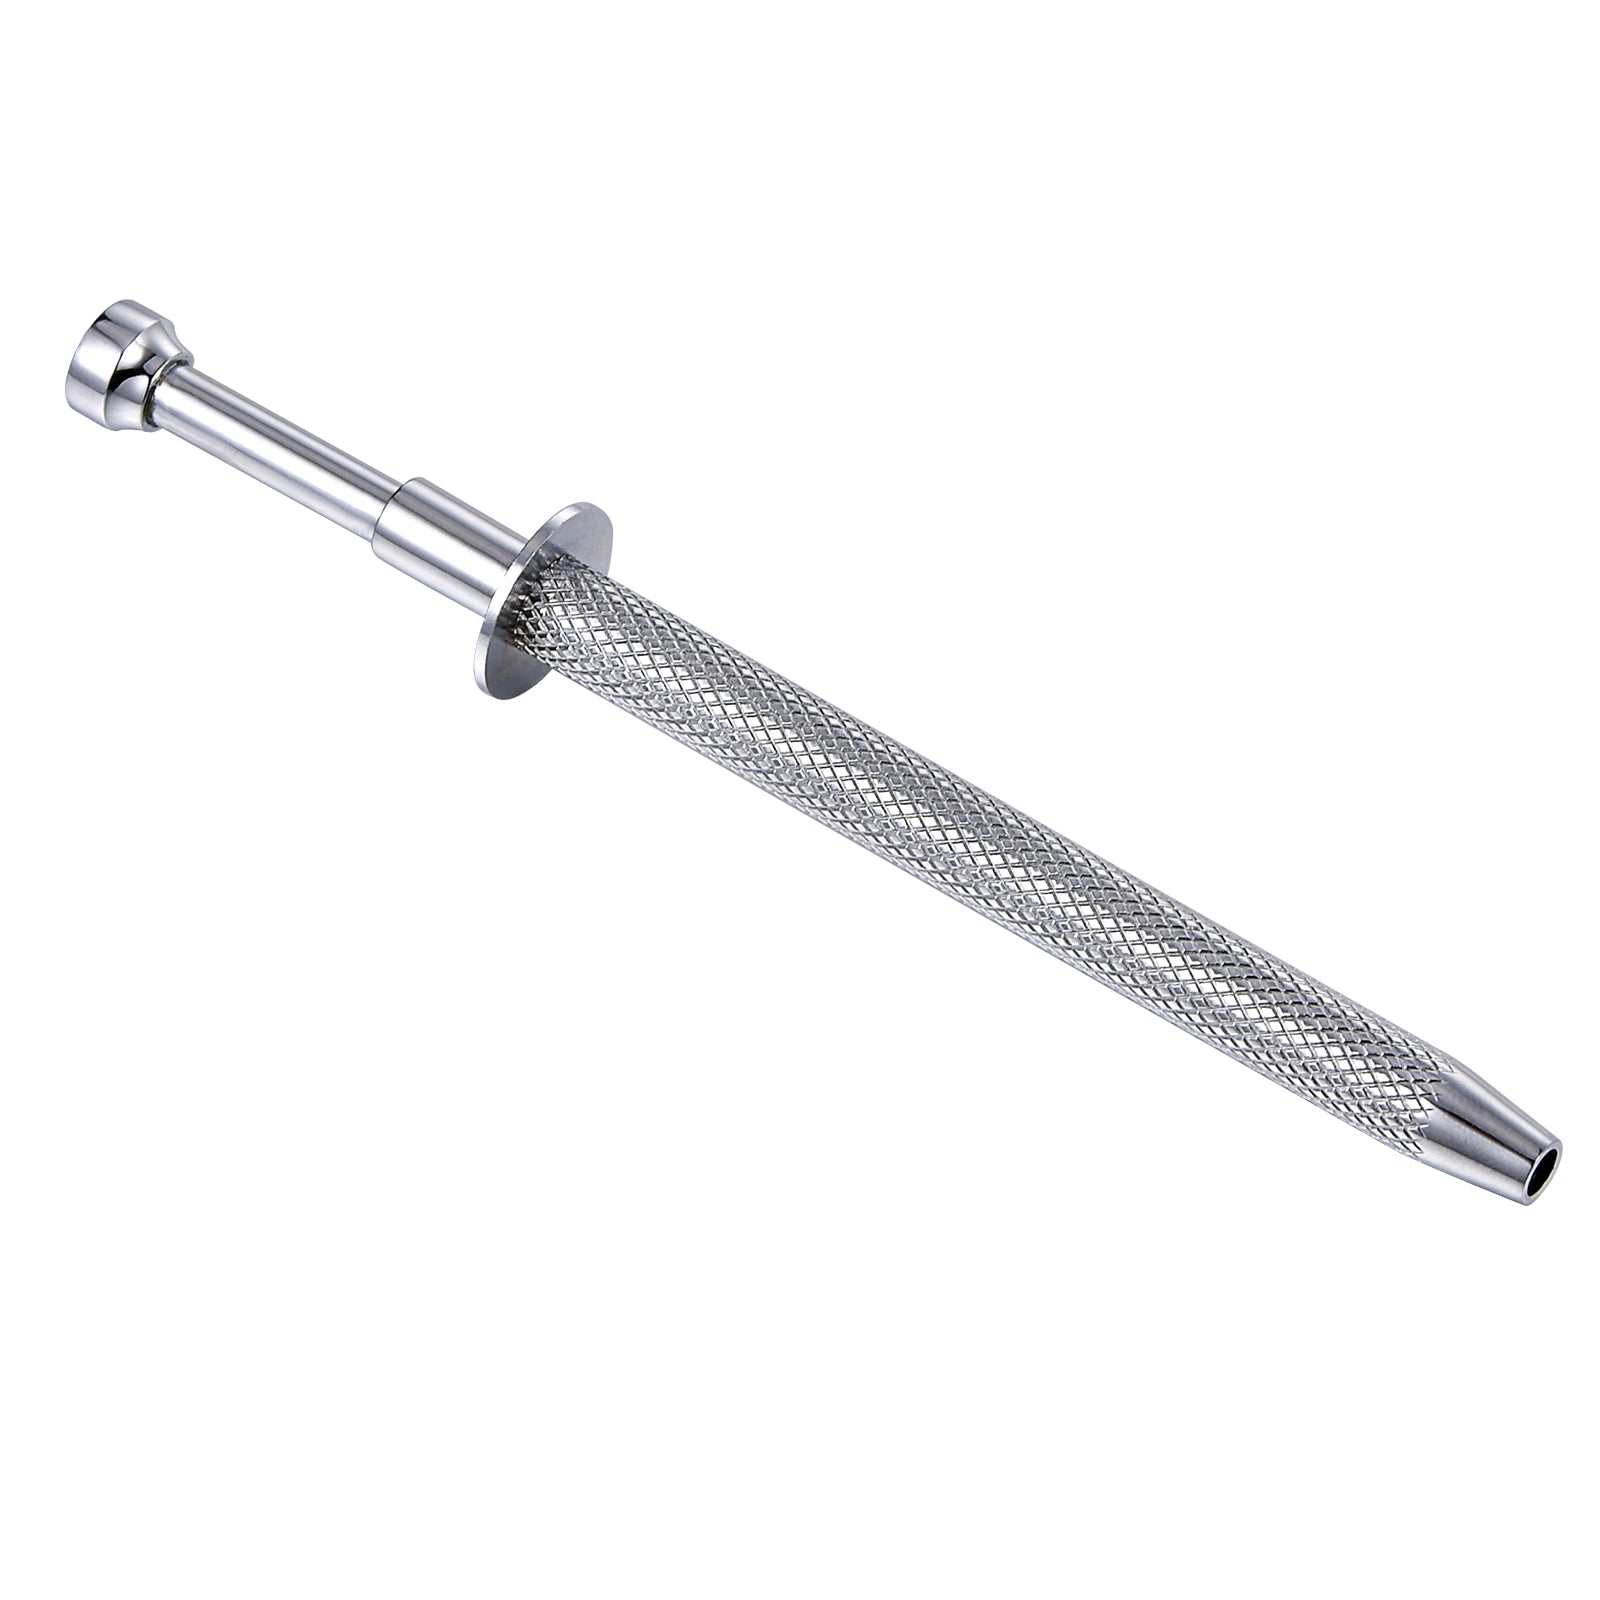 Piercing Ball Grabber Tool,Pick-Up Tool with 4 Prongs Professional Surgical Steel Push in Syringe Type Quad Prong Small Bead Holder Grab Ball Catcher Body Piercing-Tool